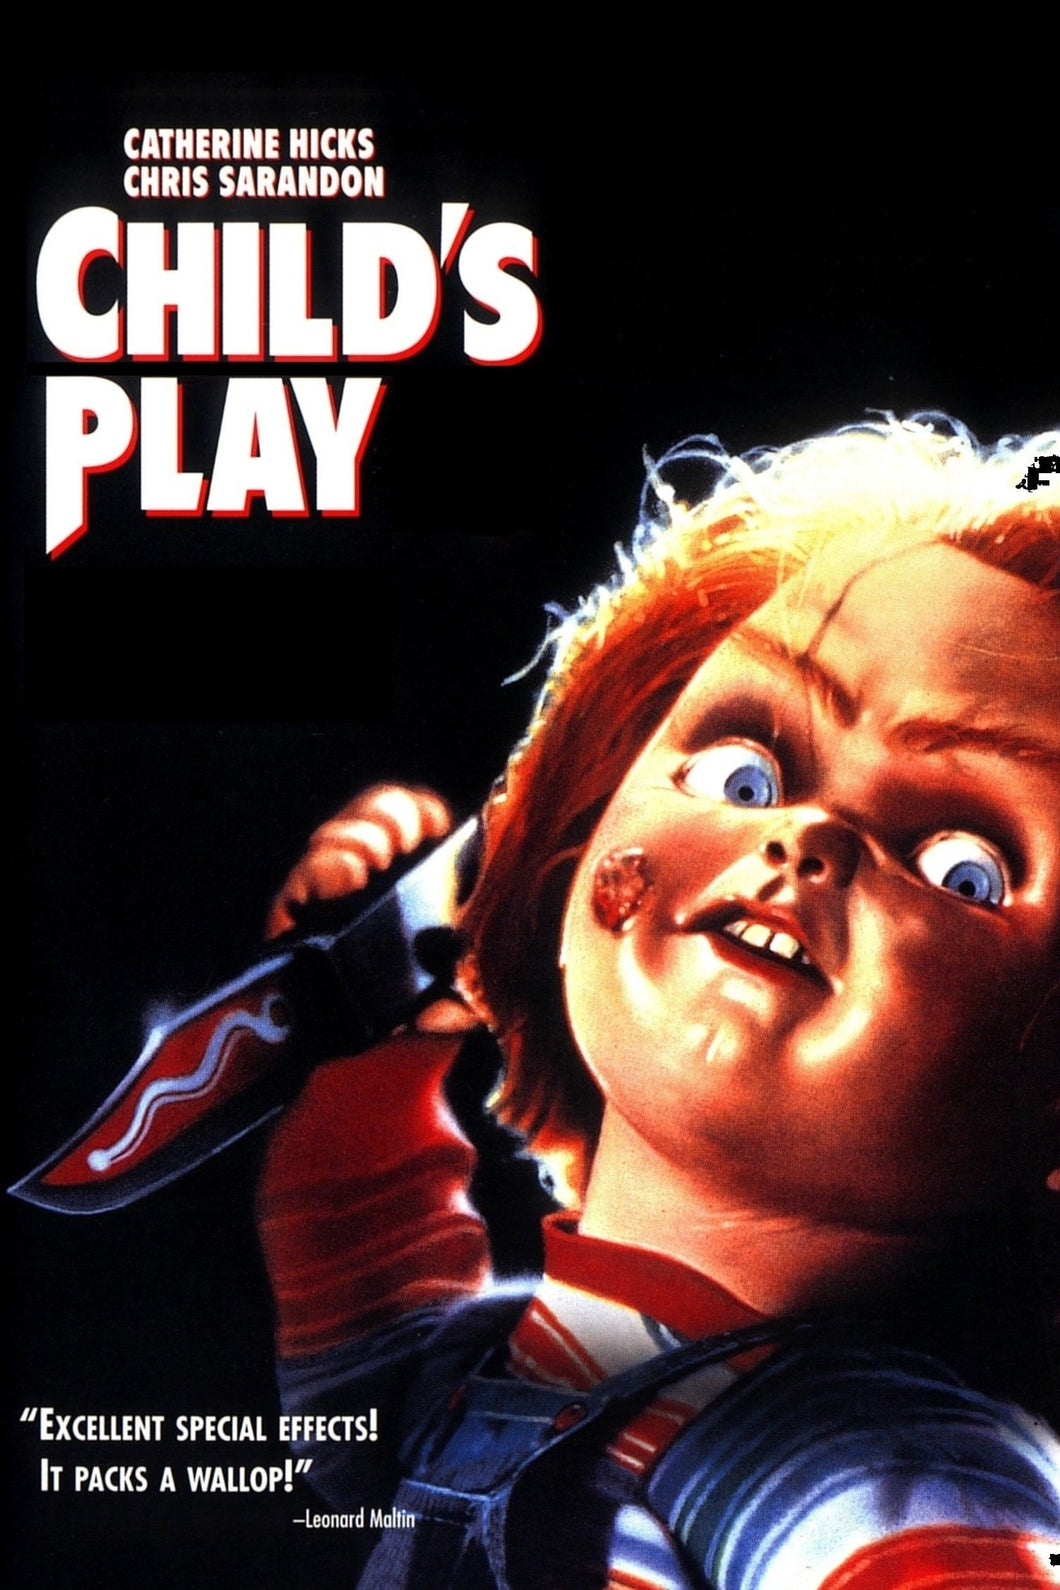 Child_s Play (1988) Movie Poster High Quality Glossy Paper A1 A2 A3 A4 A3 Framed or Unframed!!!